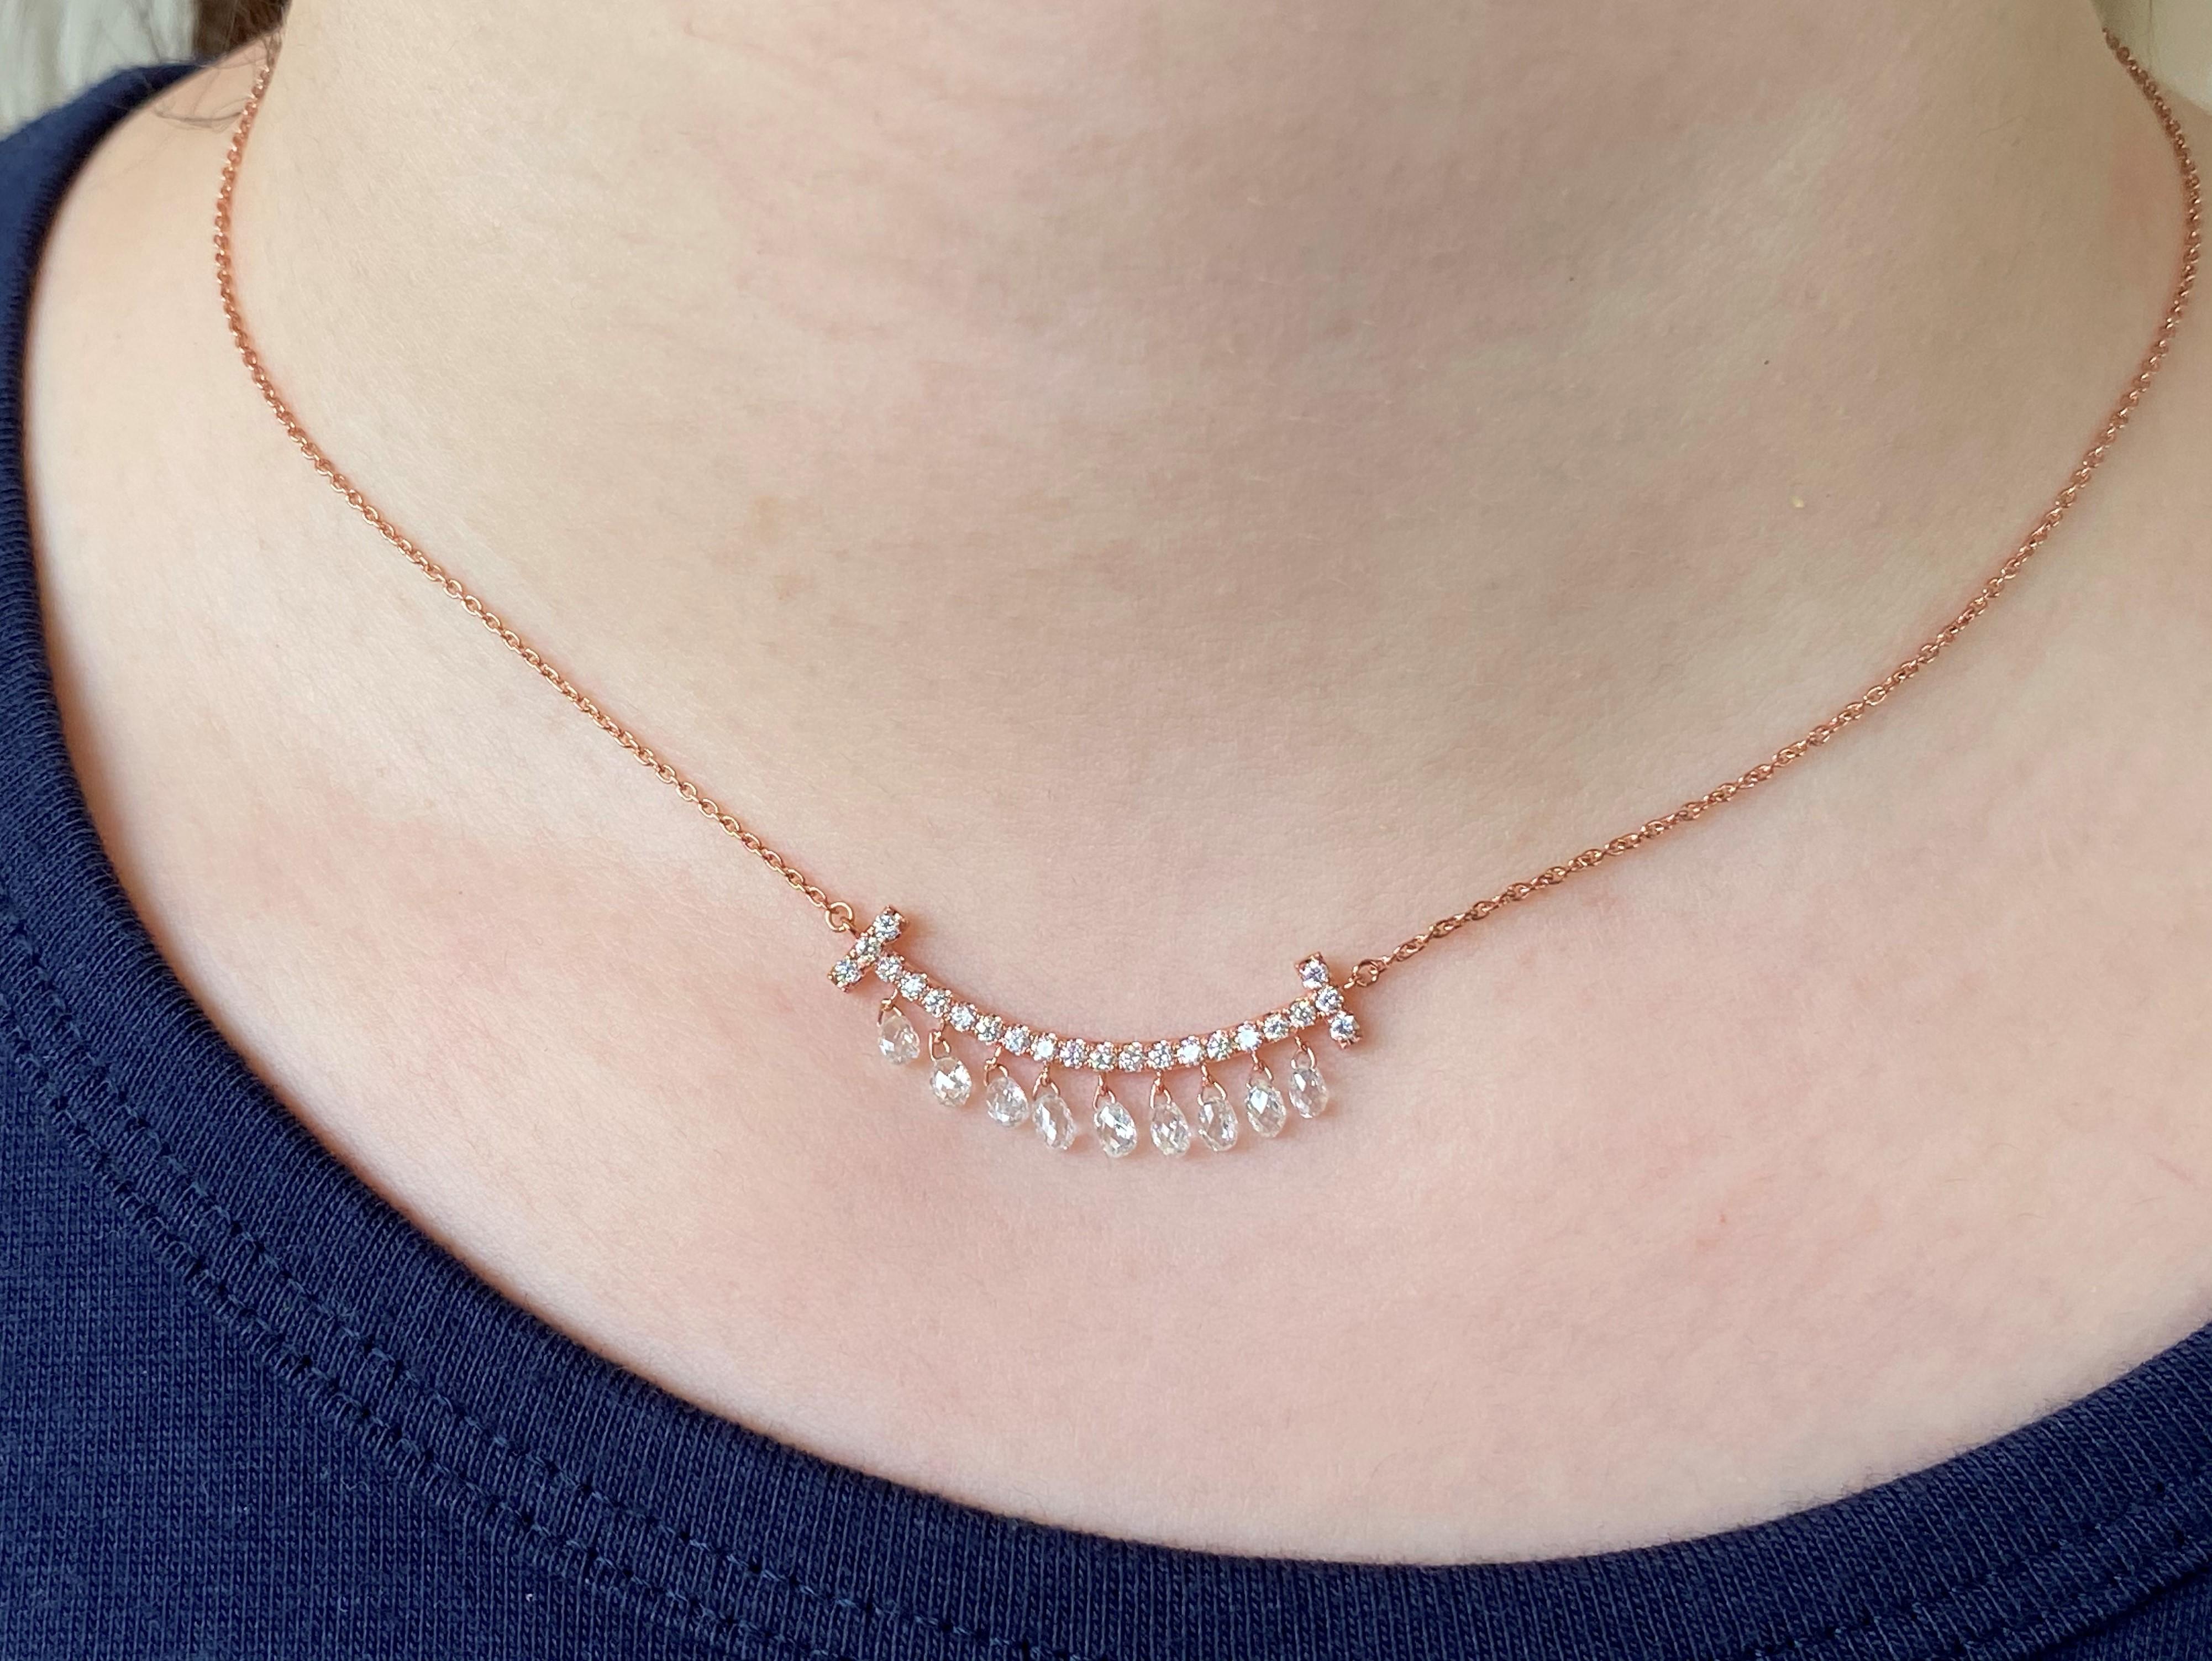 JR 1.49 carat Diamond Briolette Dangling Necklace 18 Karat Rose Gold

This contemporary piece of necklace is made with  diamond Briolette and it eludes femininity & grace.
Diamond Briolette Dangling Choker has slider ball to adjust the length from